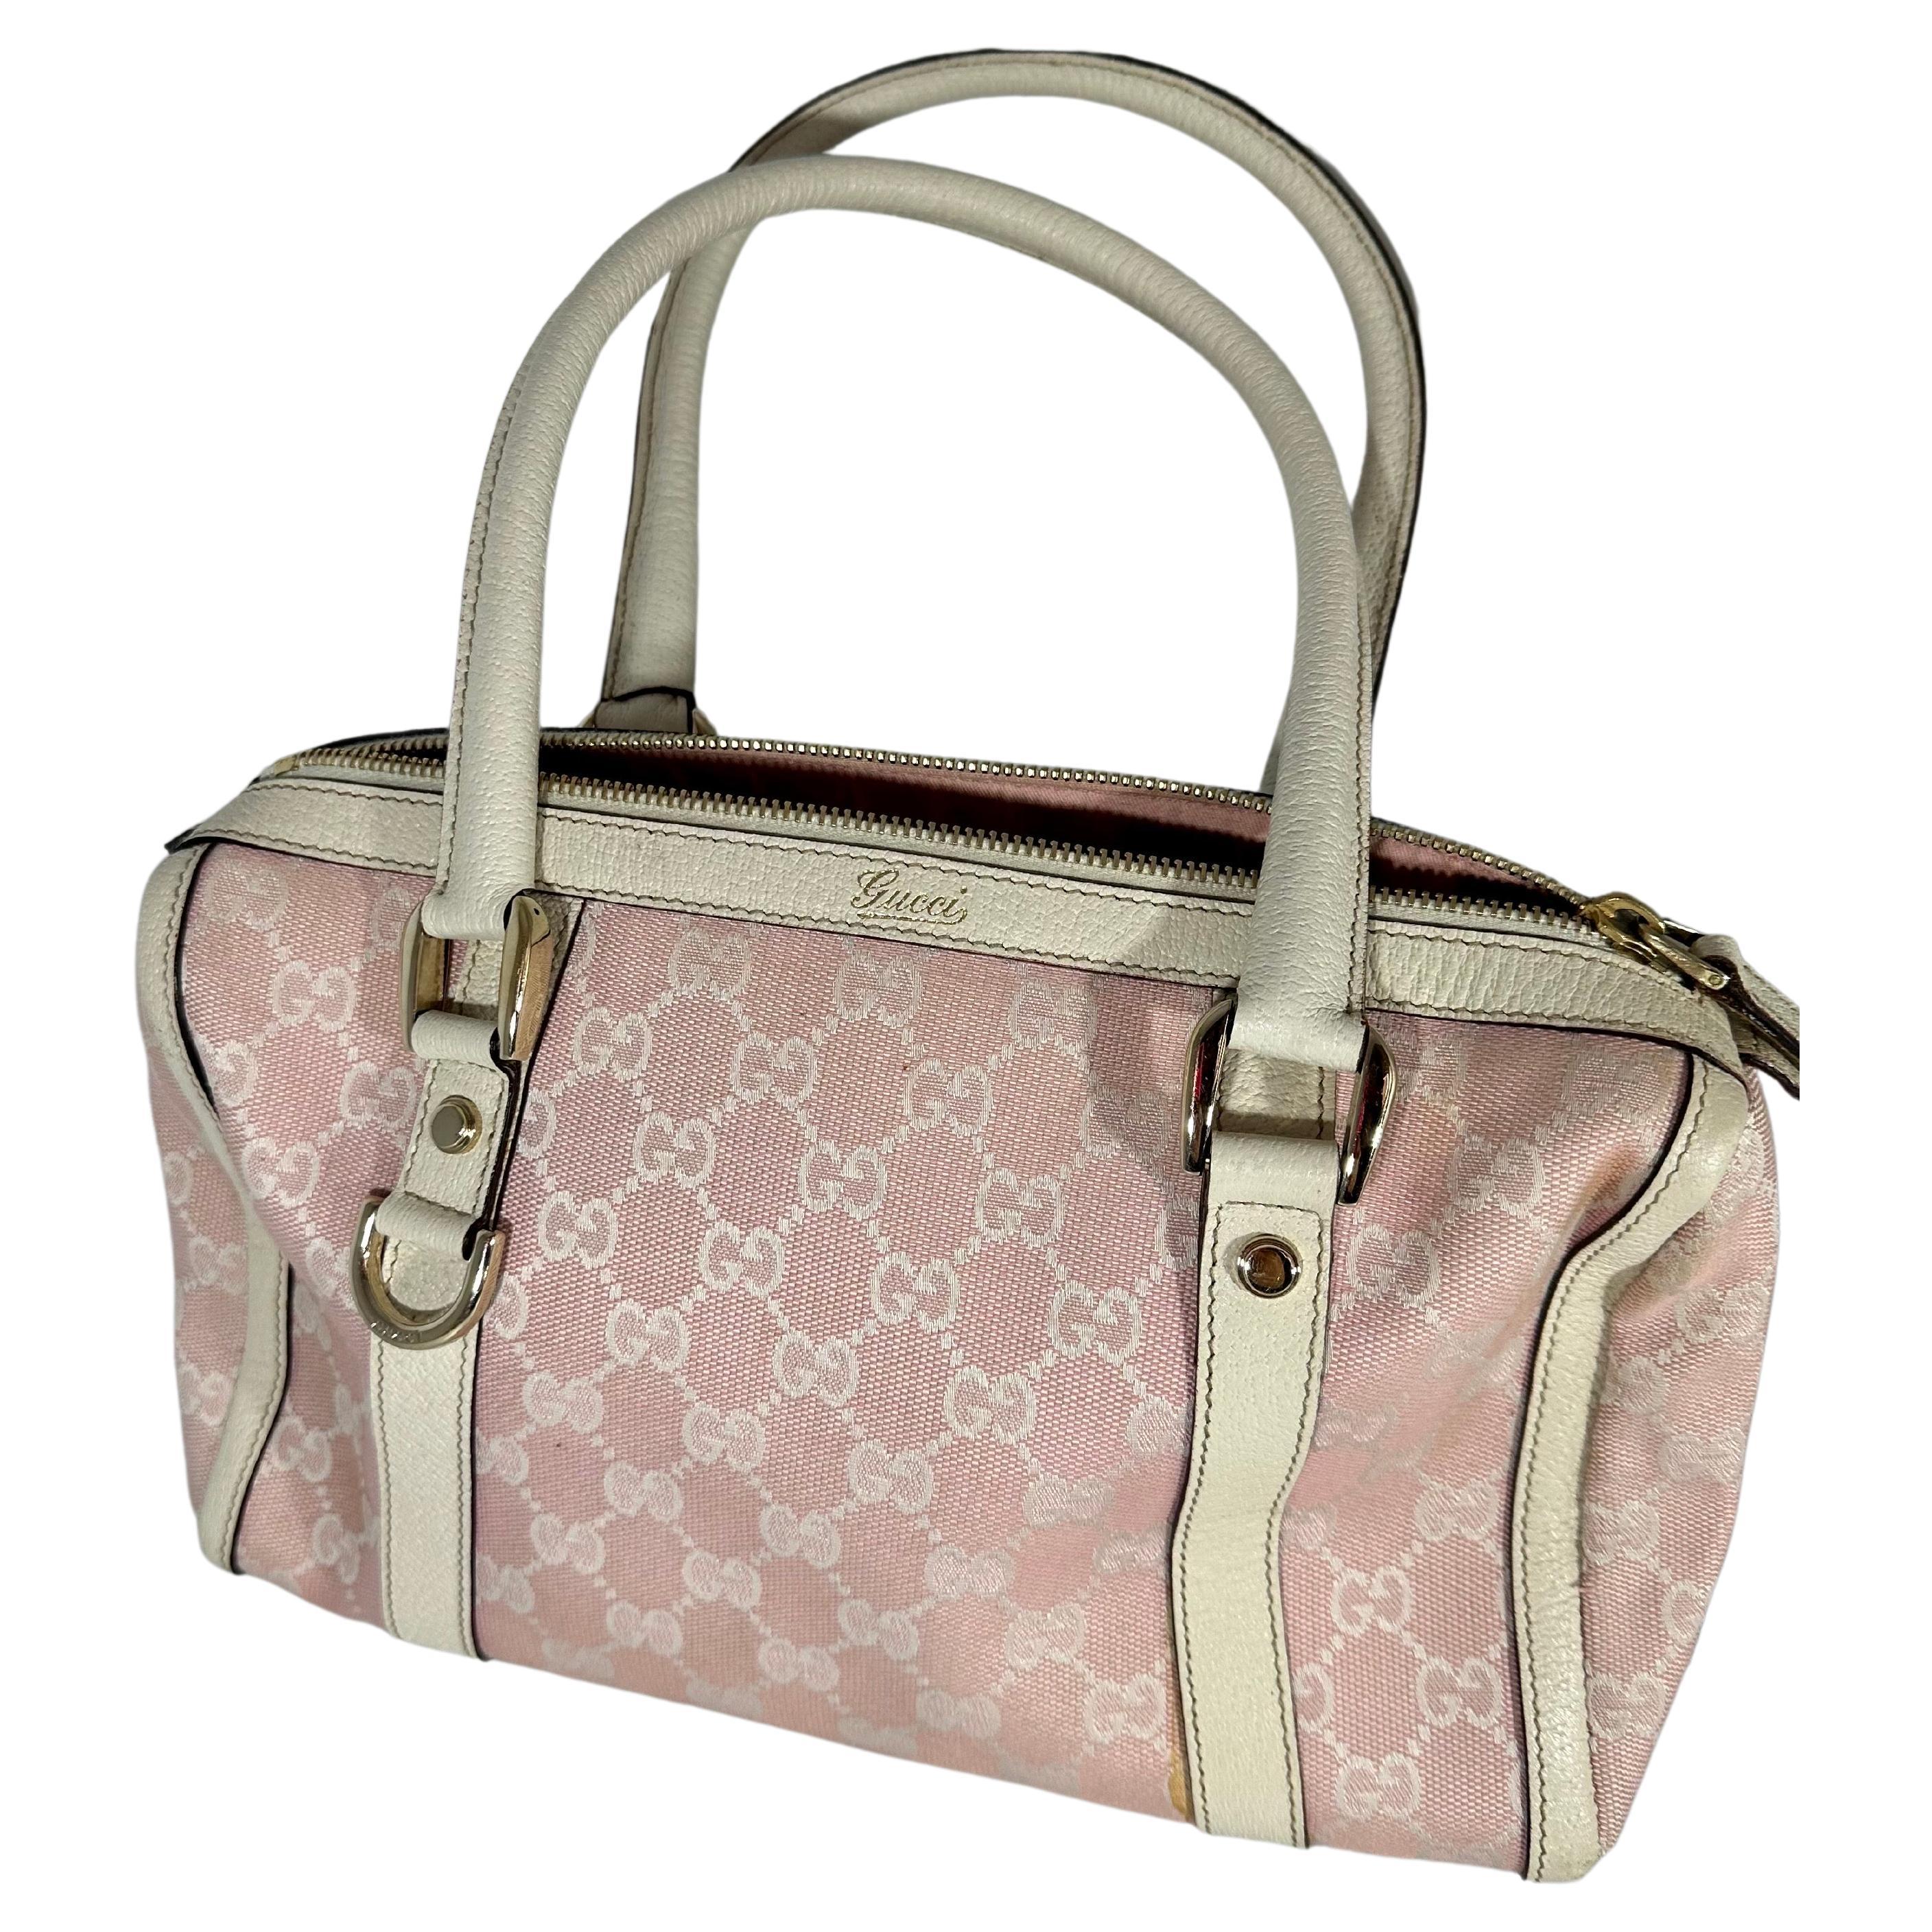 Gucci GG Canvas Mini Boston Bag simple in Excellent condition like New
A pretty-in-pink addition to your everyday accessory repertoire, this Gucci Abbey Boston handbag is cut from the label's Original GG Canvas with white leather trim at its